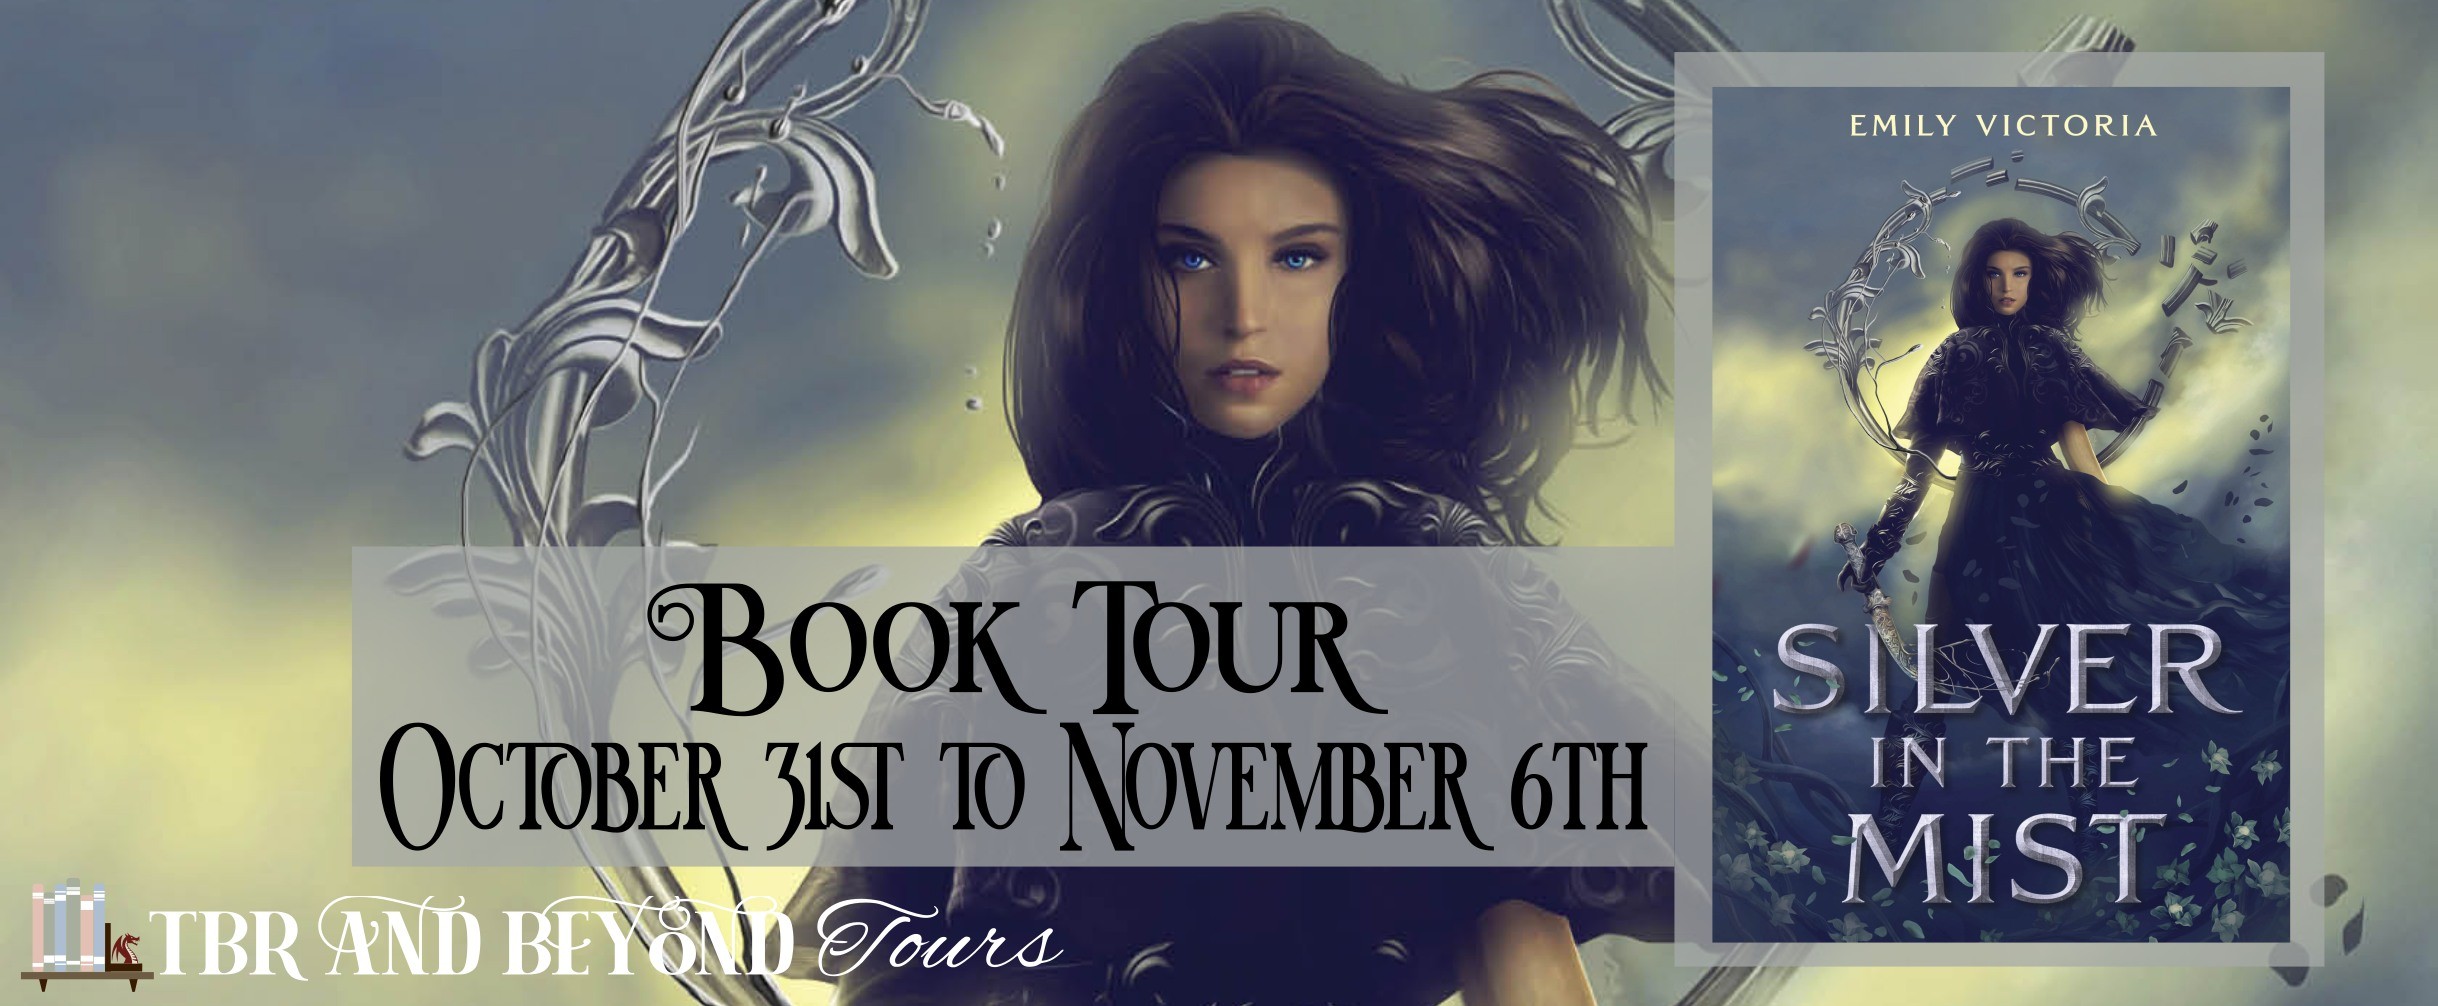 Silver in the Mist by Emily Victoria TBR & Beyond Blog Tour ● Review